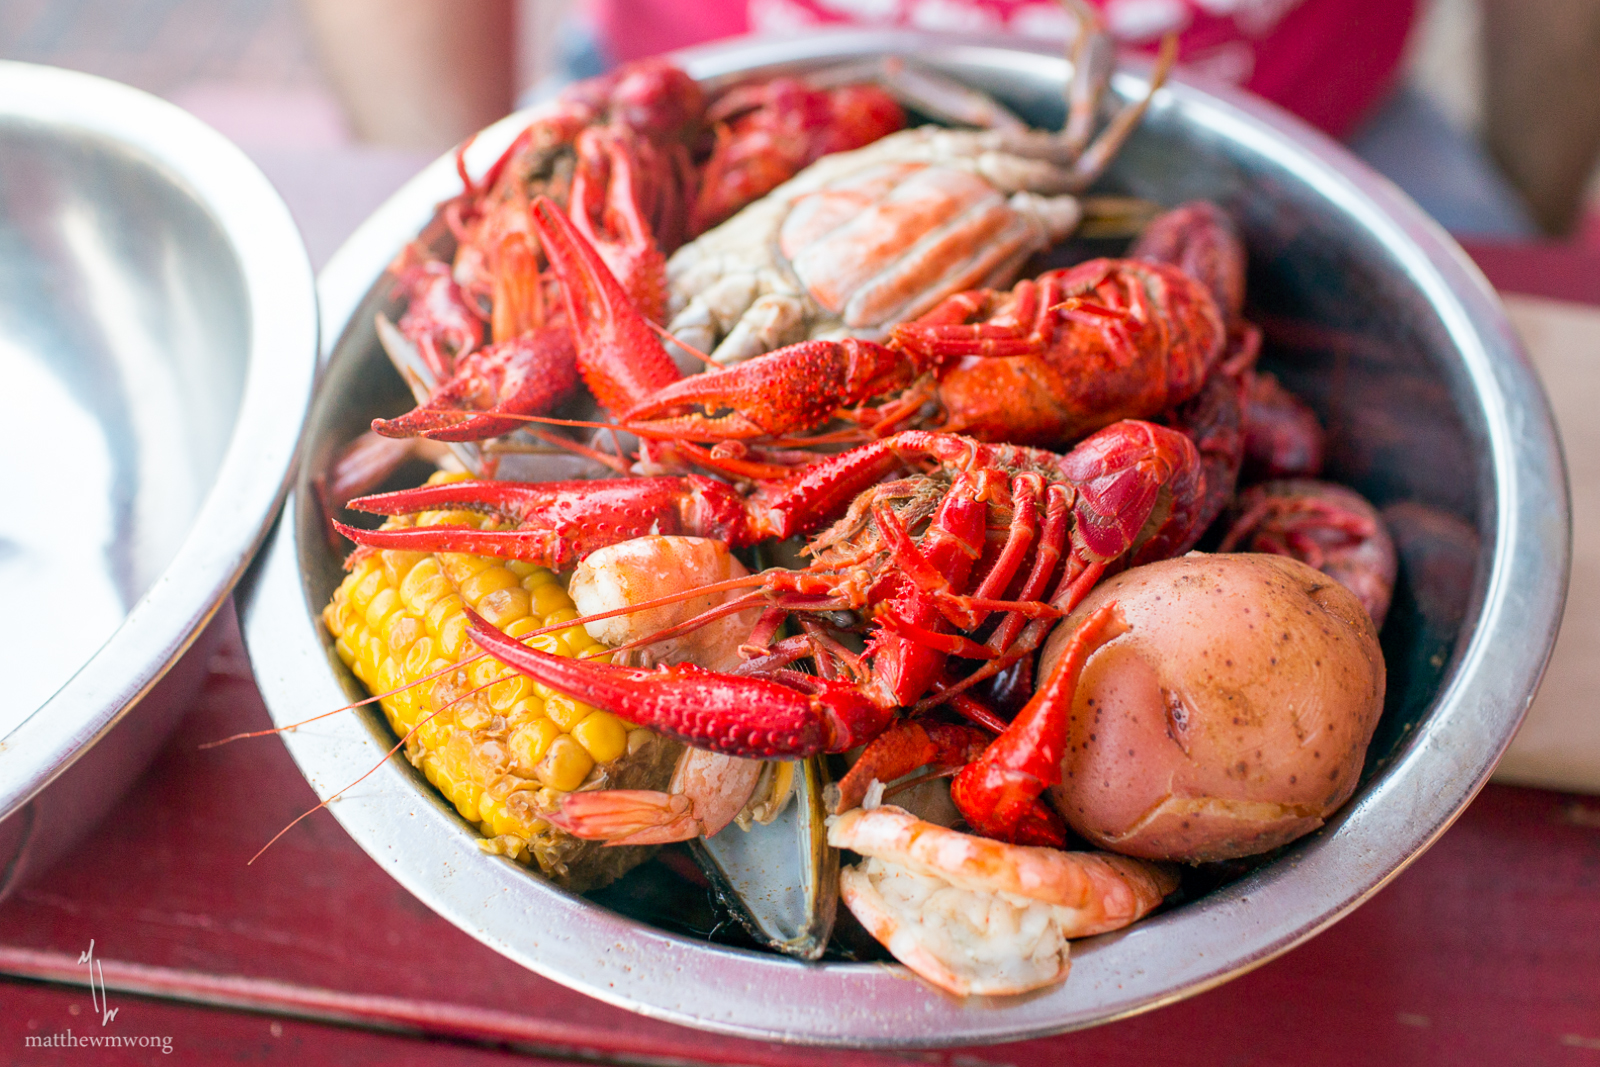 Shack-tastic Platter for one - boiled Snow Crab, Blue Crab, Mussel, Shrimp, Corn and Red Potatoes